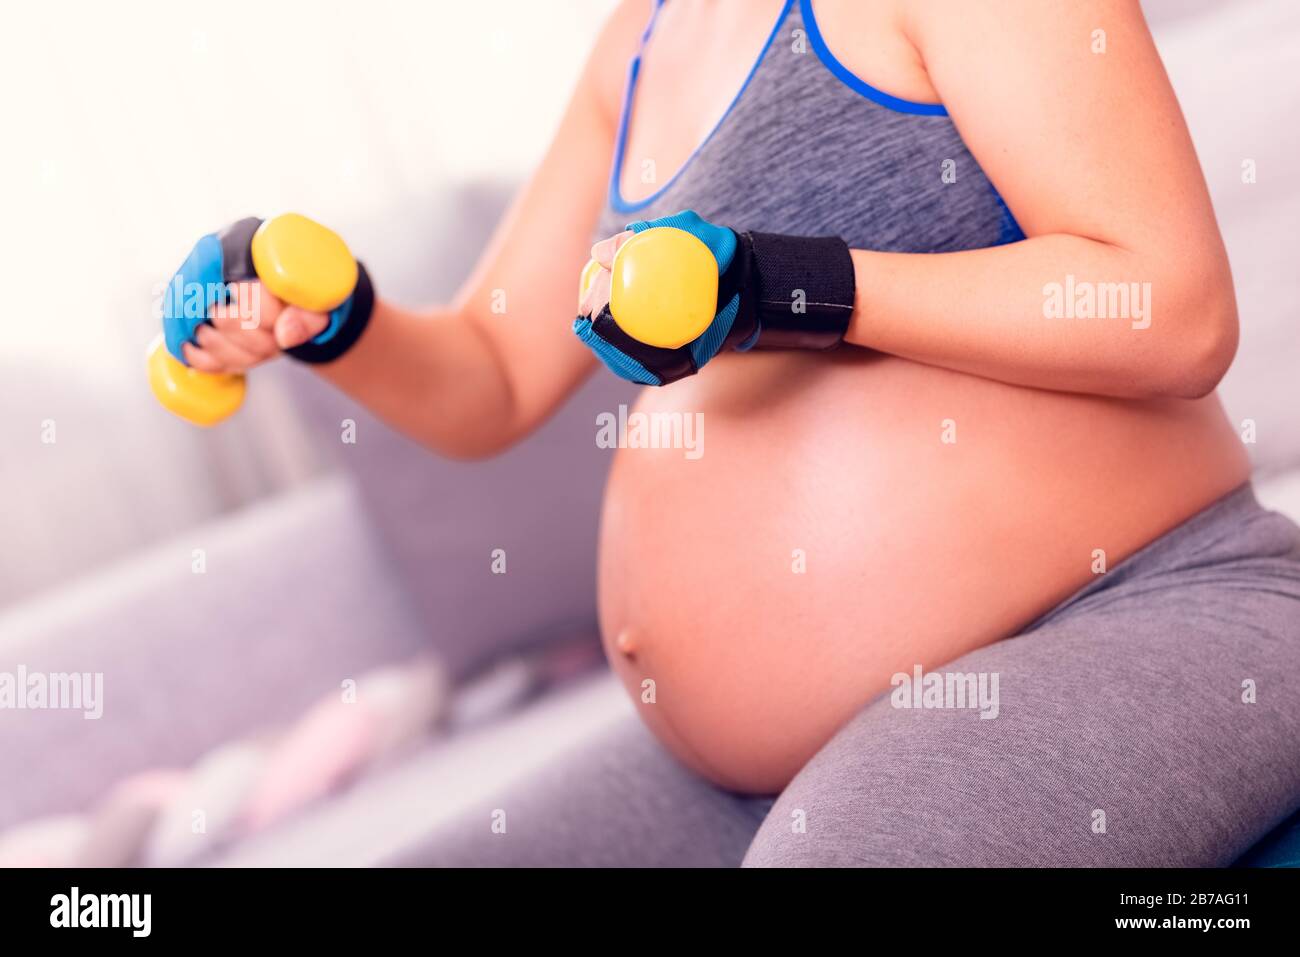 Pregnant woman workout. Staying active while pregnant, exercising with  dumbbells. Stock Photo